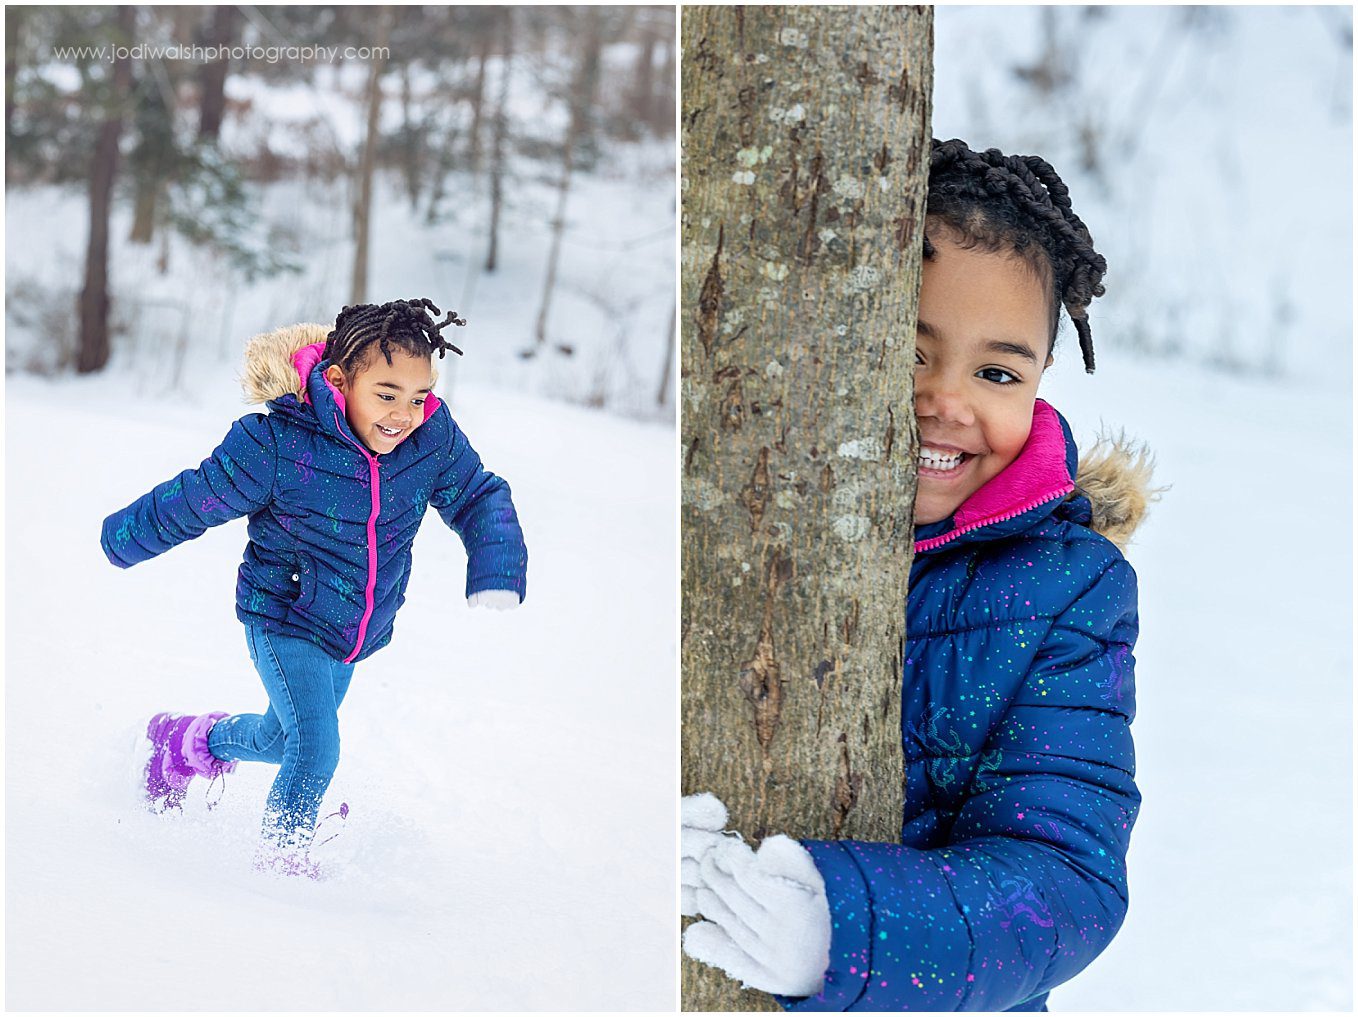 image of a little girl in a blue winter coat running in the snow and hiding behind a tree